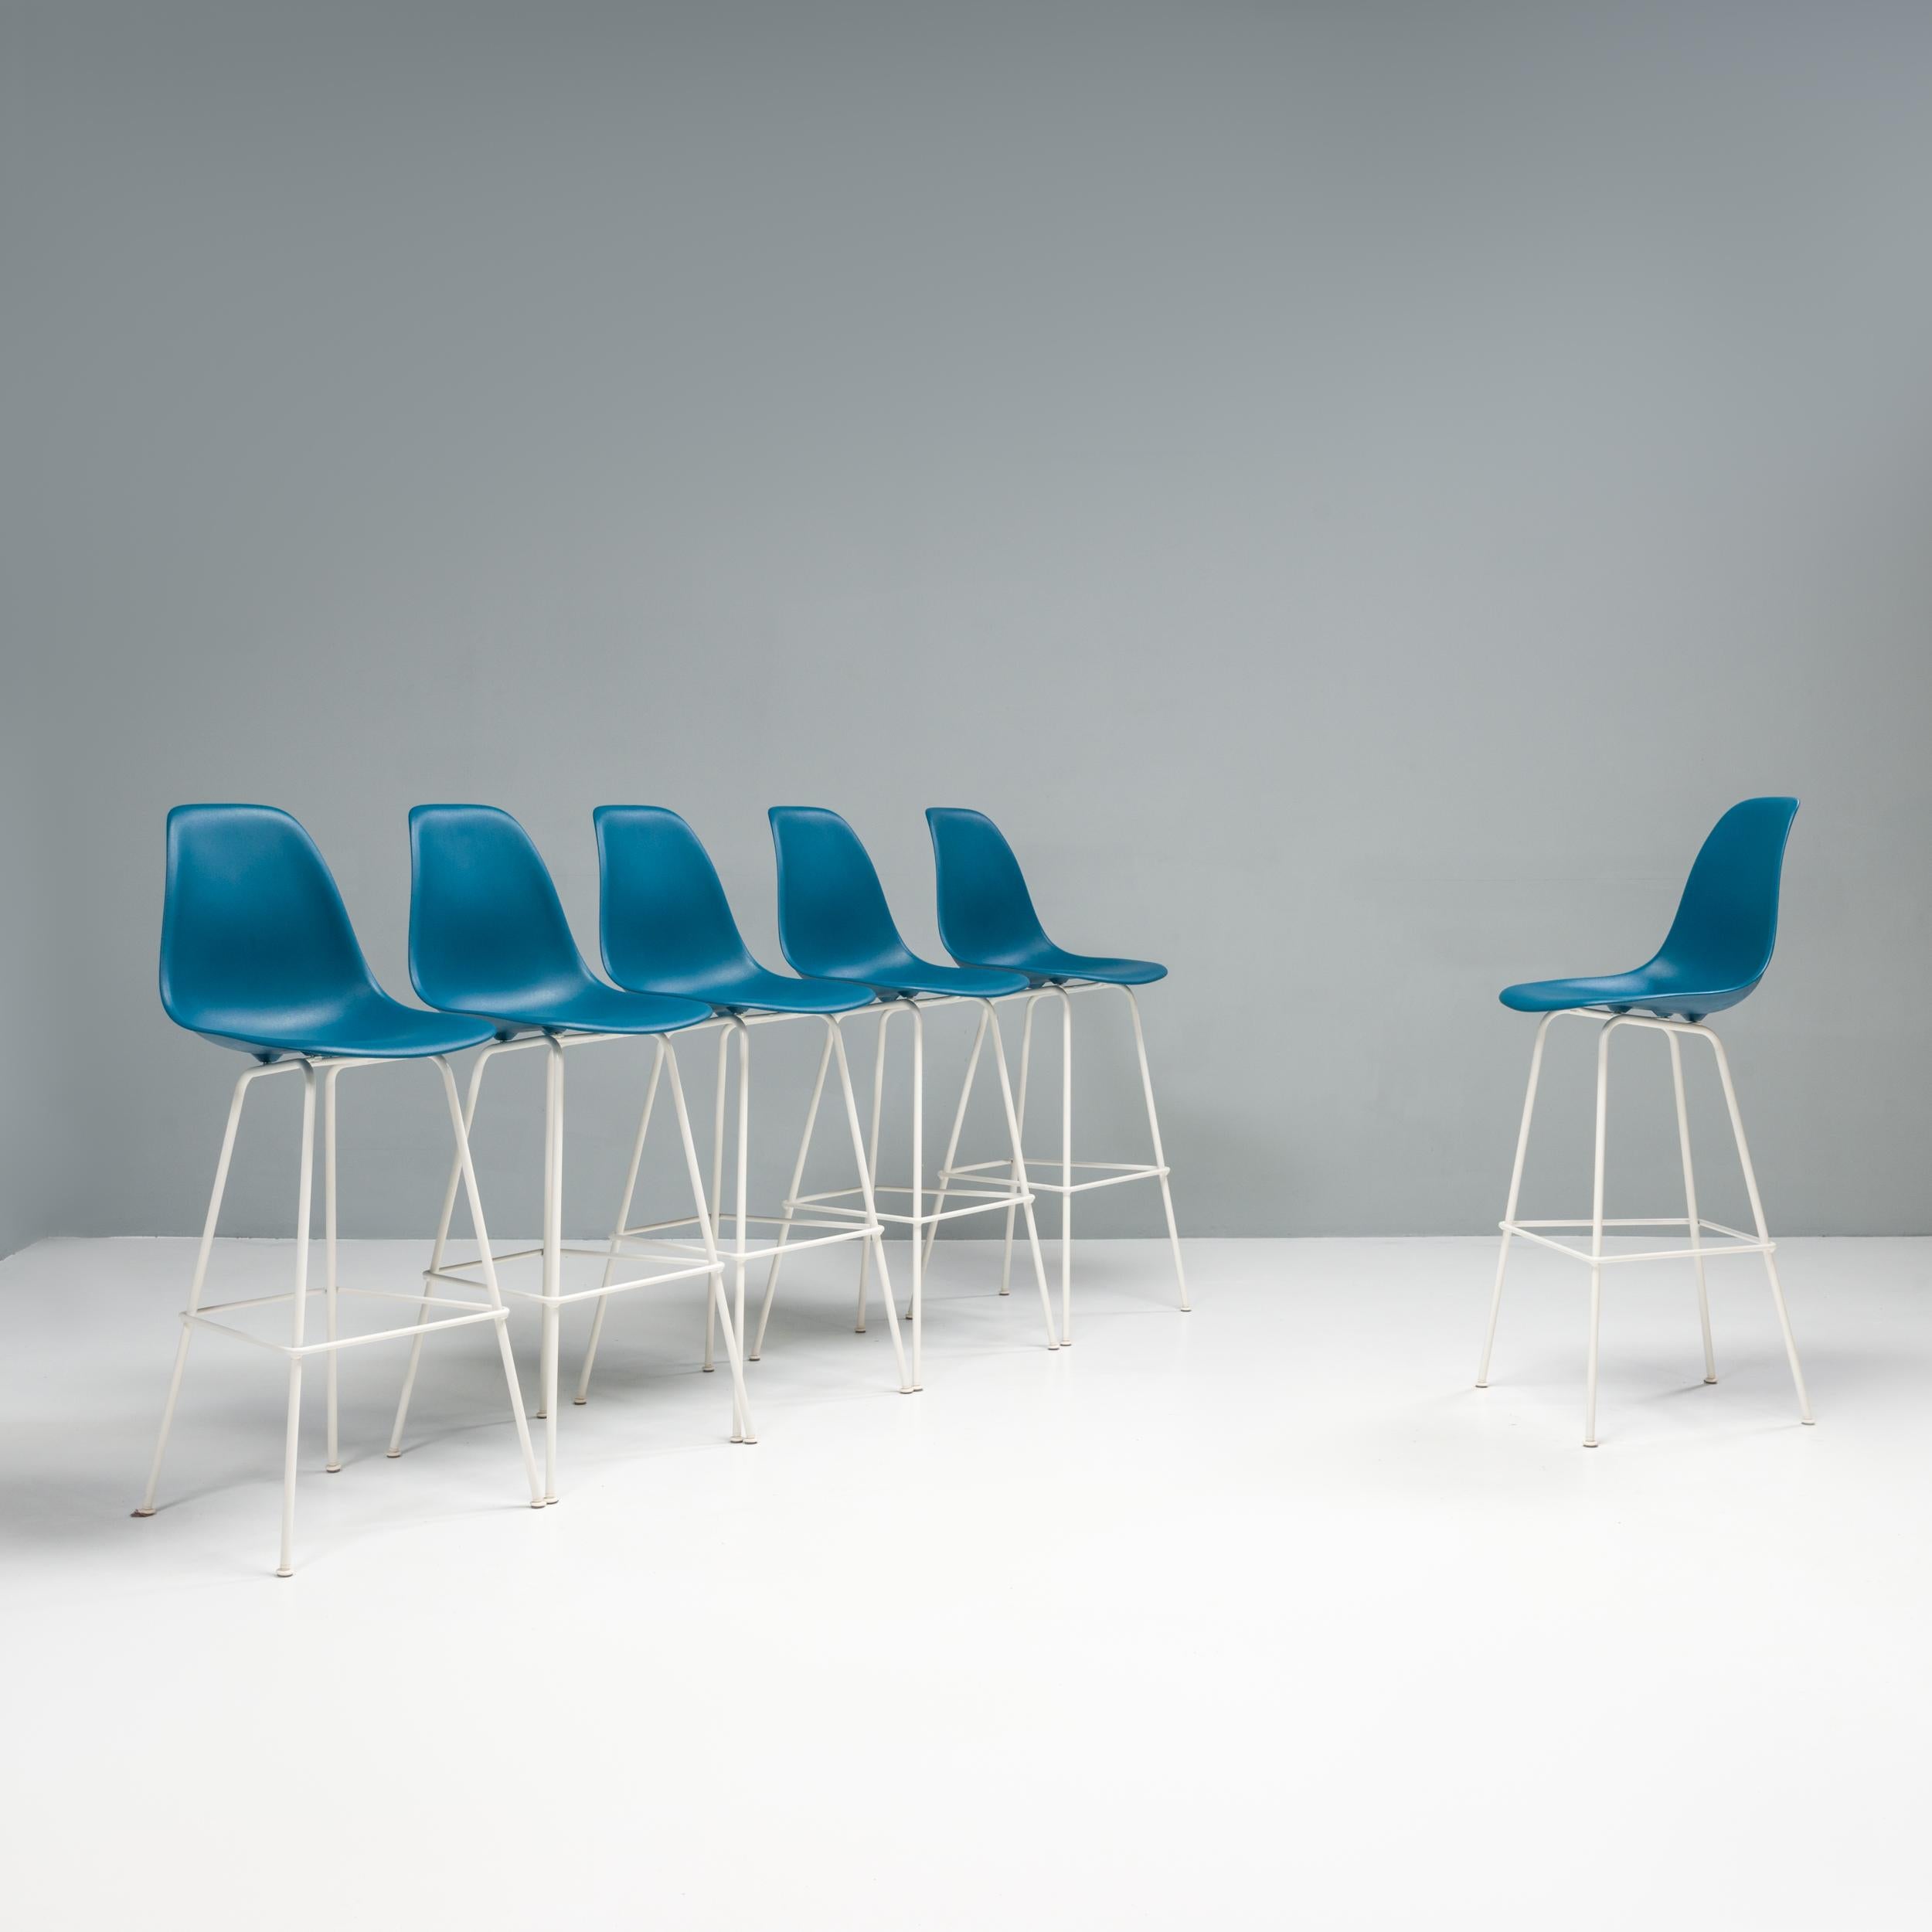 The plastic chair series was originally designed by Charles and Ray Eames in the 1950s and has since become one of the most iconic furniture designs of the twentieth century.

Introduced in 2015 and manufactured by Herman Miller in 2022, this set